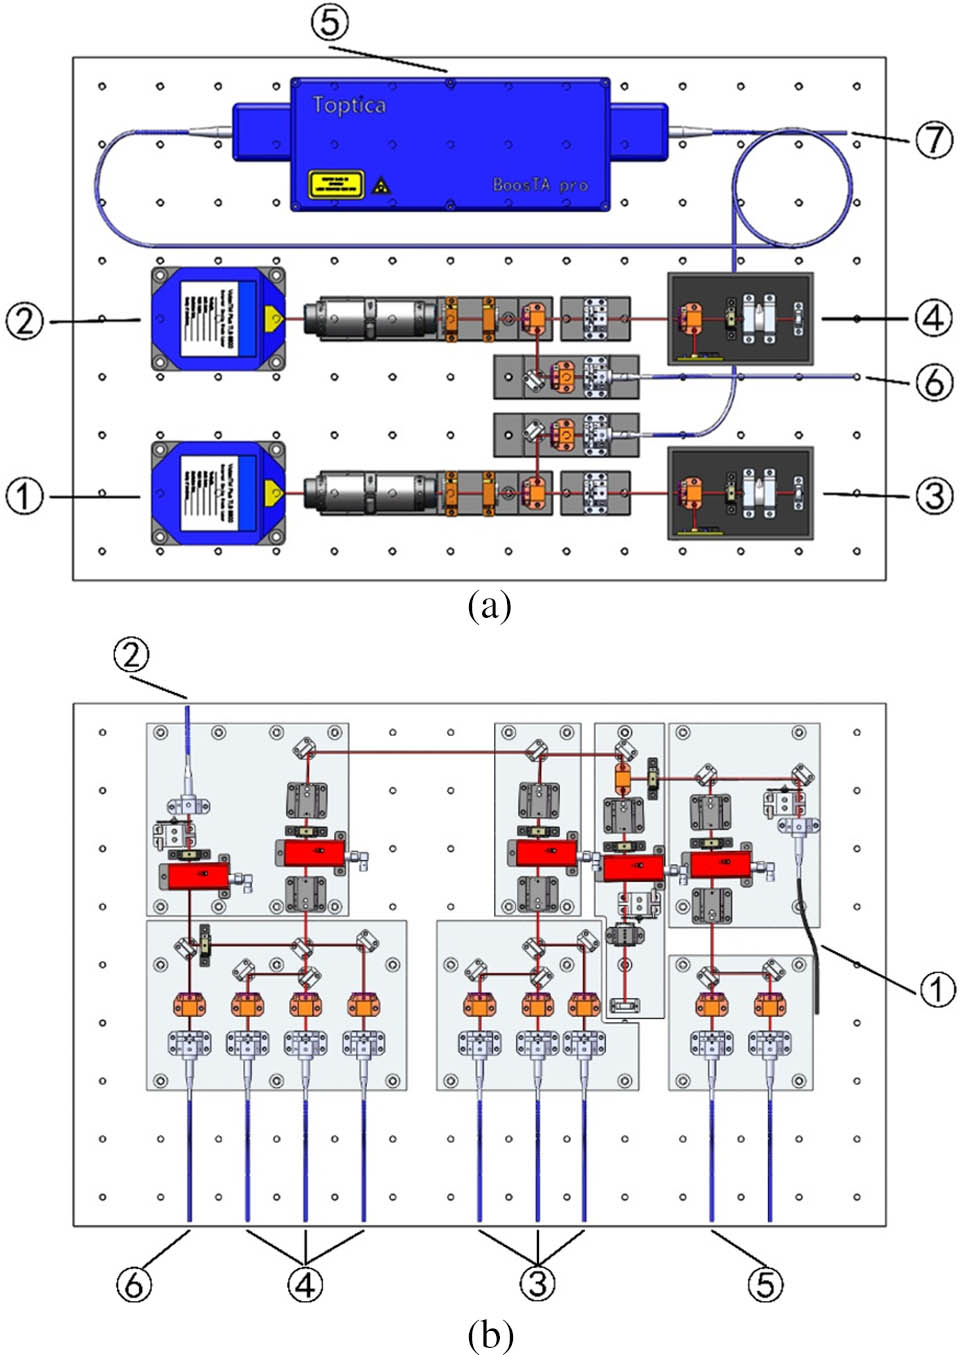 Model diagrams of the optical benches. (a) The laser source bench with ECDL and TA, which is used to produce and amplify the cooling laser and the repumping laser. ①, ②: ECDLs; ③, ④: the saturation absorption modules; ⑤: TA; ⑥: the repumping laser output; ⑦: cooling laser output. (b) The laser-regulating bench divides and combines the cooling laser or repumping laser. ①: cooling laser input; ②: repumping laser input; ③: upward cooling laser output; ④: downward cooling laser output; ⑤: detection laser output; ⑥ repumping laser output.